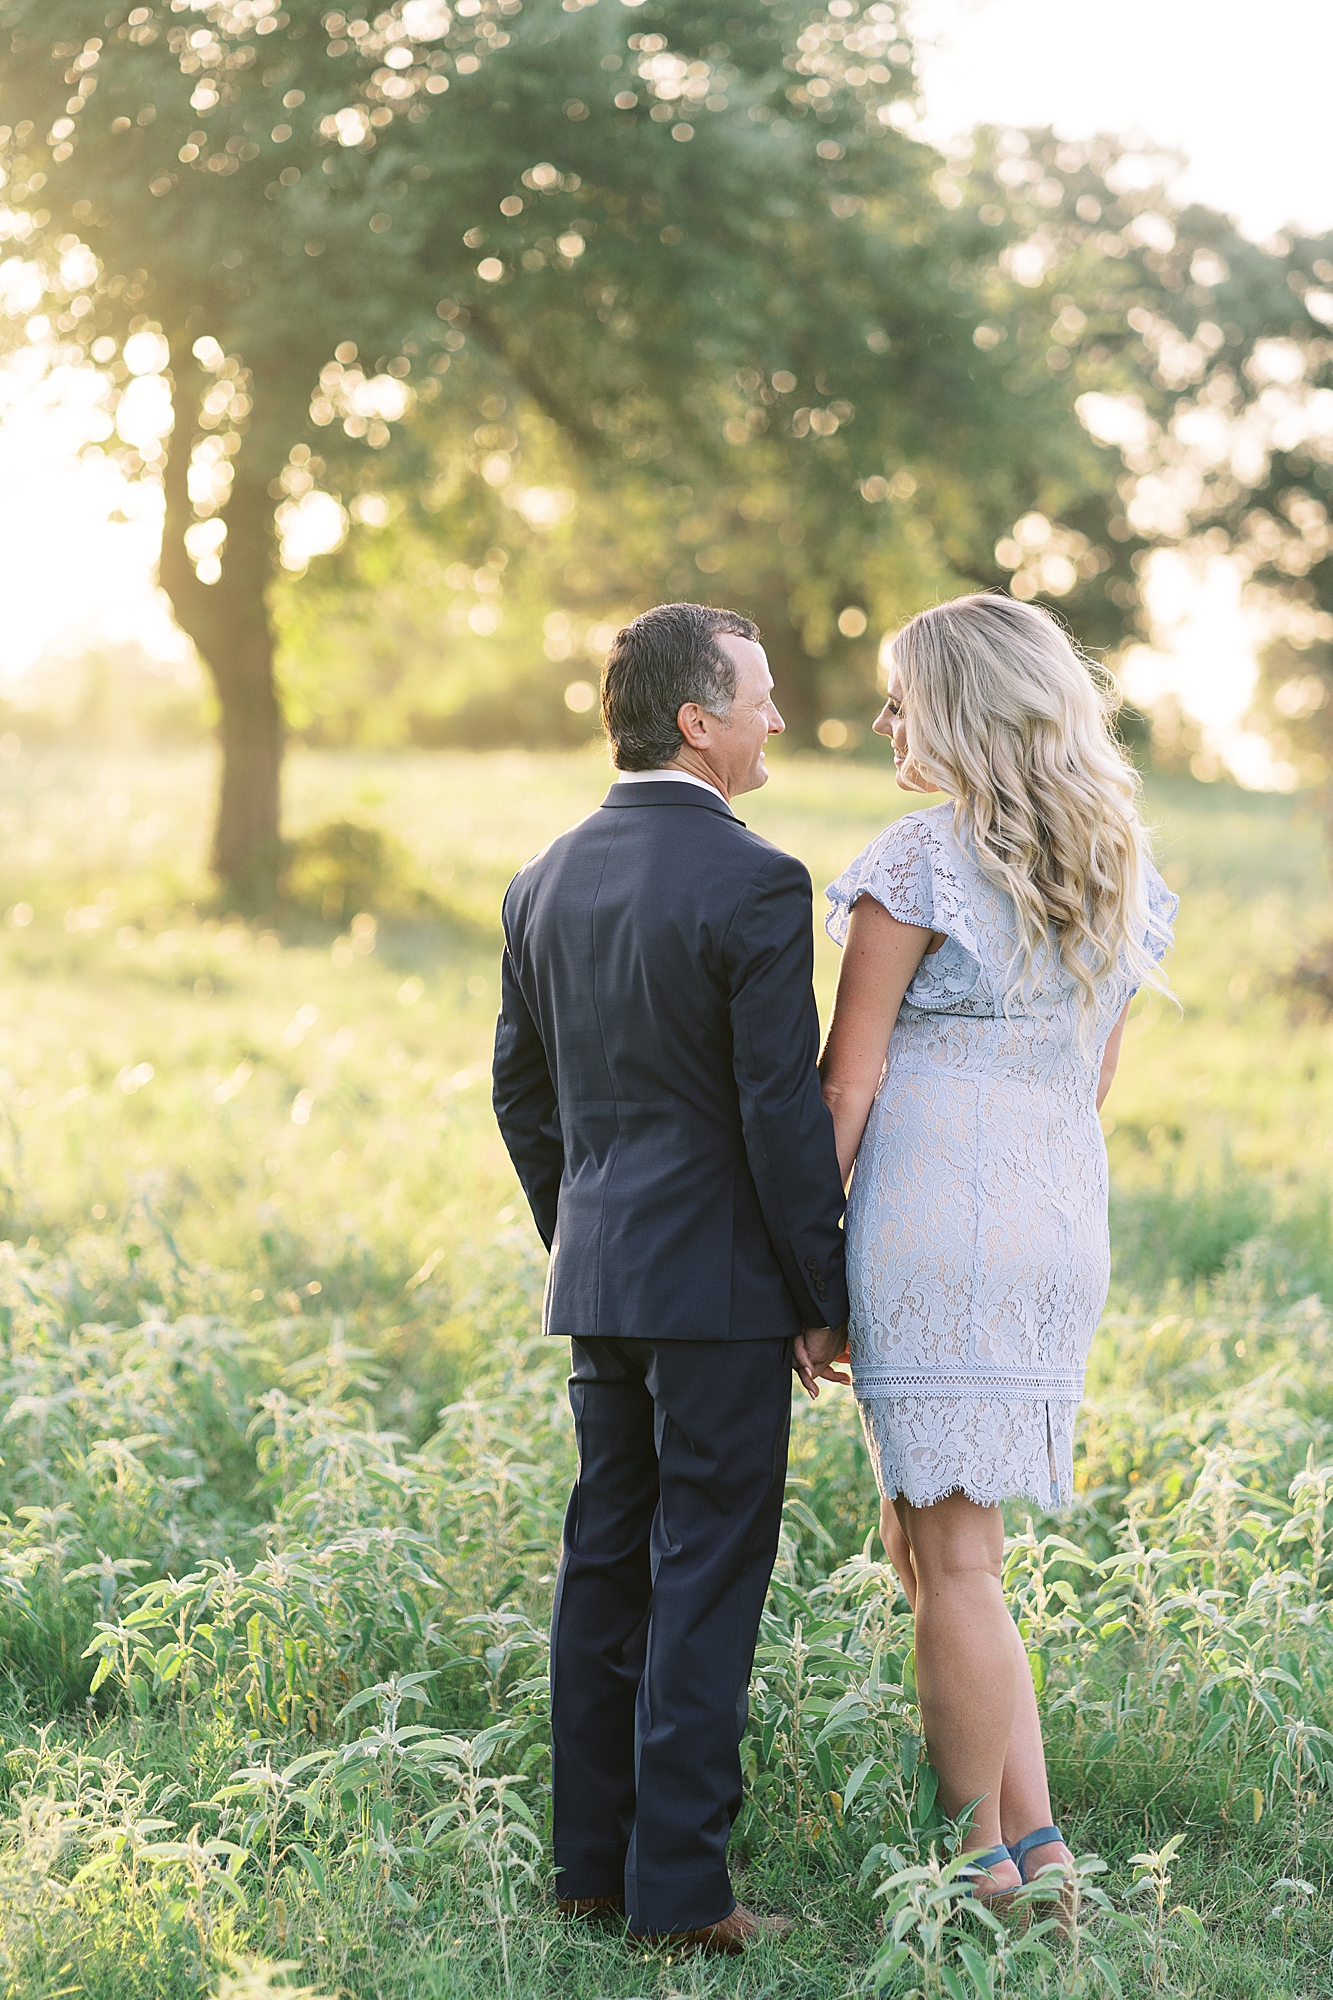 YES you should invite all your animals to your engagement session! Set on the couples' property, this Texas Hill Country engagement session is the perfect mix of goregeous and classic, with sentimental and fun! AND features their cows, horses, and two pups! Click through to read their adorable story and see some perfect outfit inspiration! #engagementsession #texashillcountry #farmengagementpictures